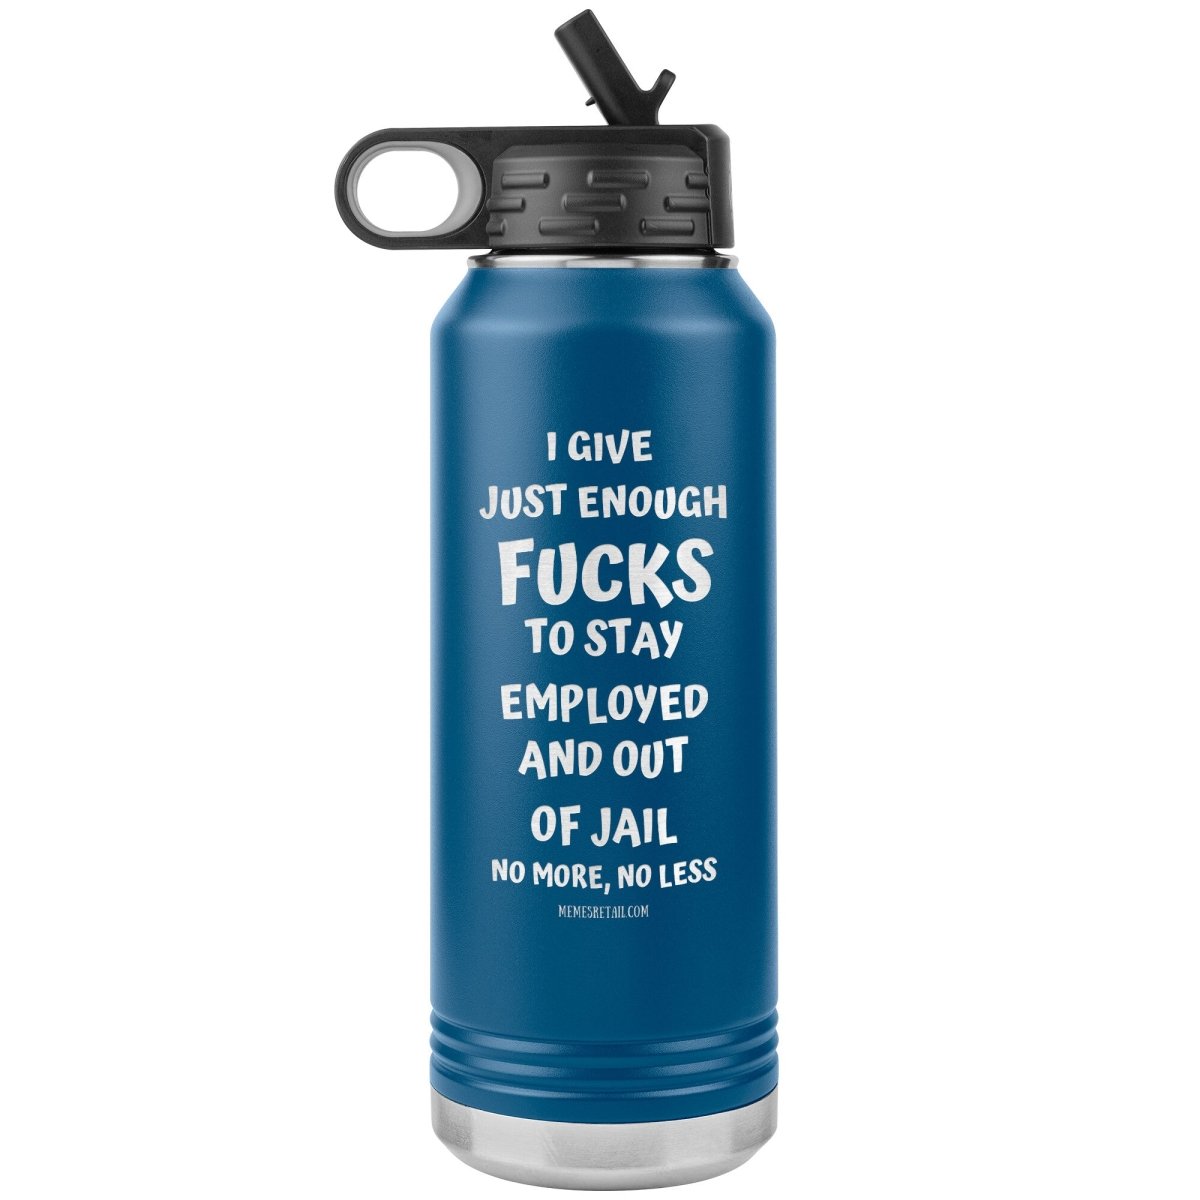 I Give Just Enough Fucks To Stay Employed And Out Of Jail, No More, No Less 32 Oz Water Bottle Tumbler, Blue - MemesRetail.com